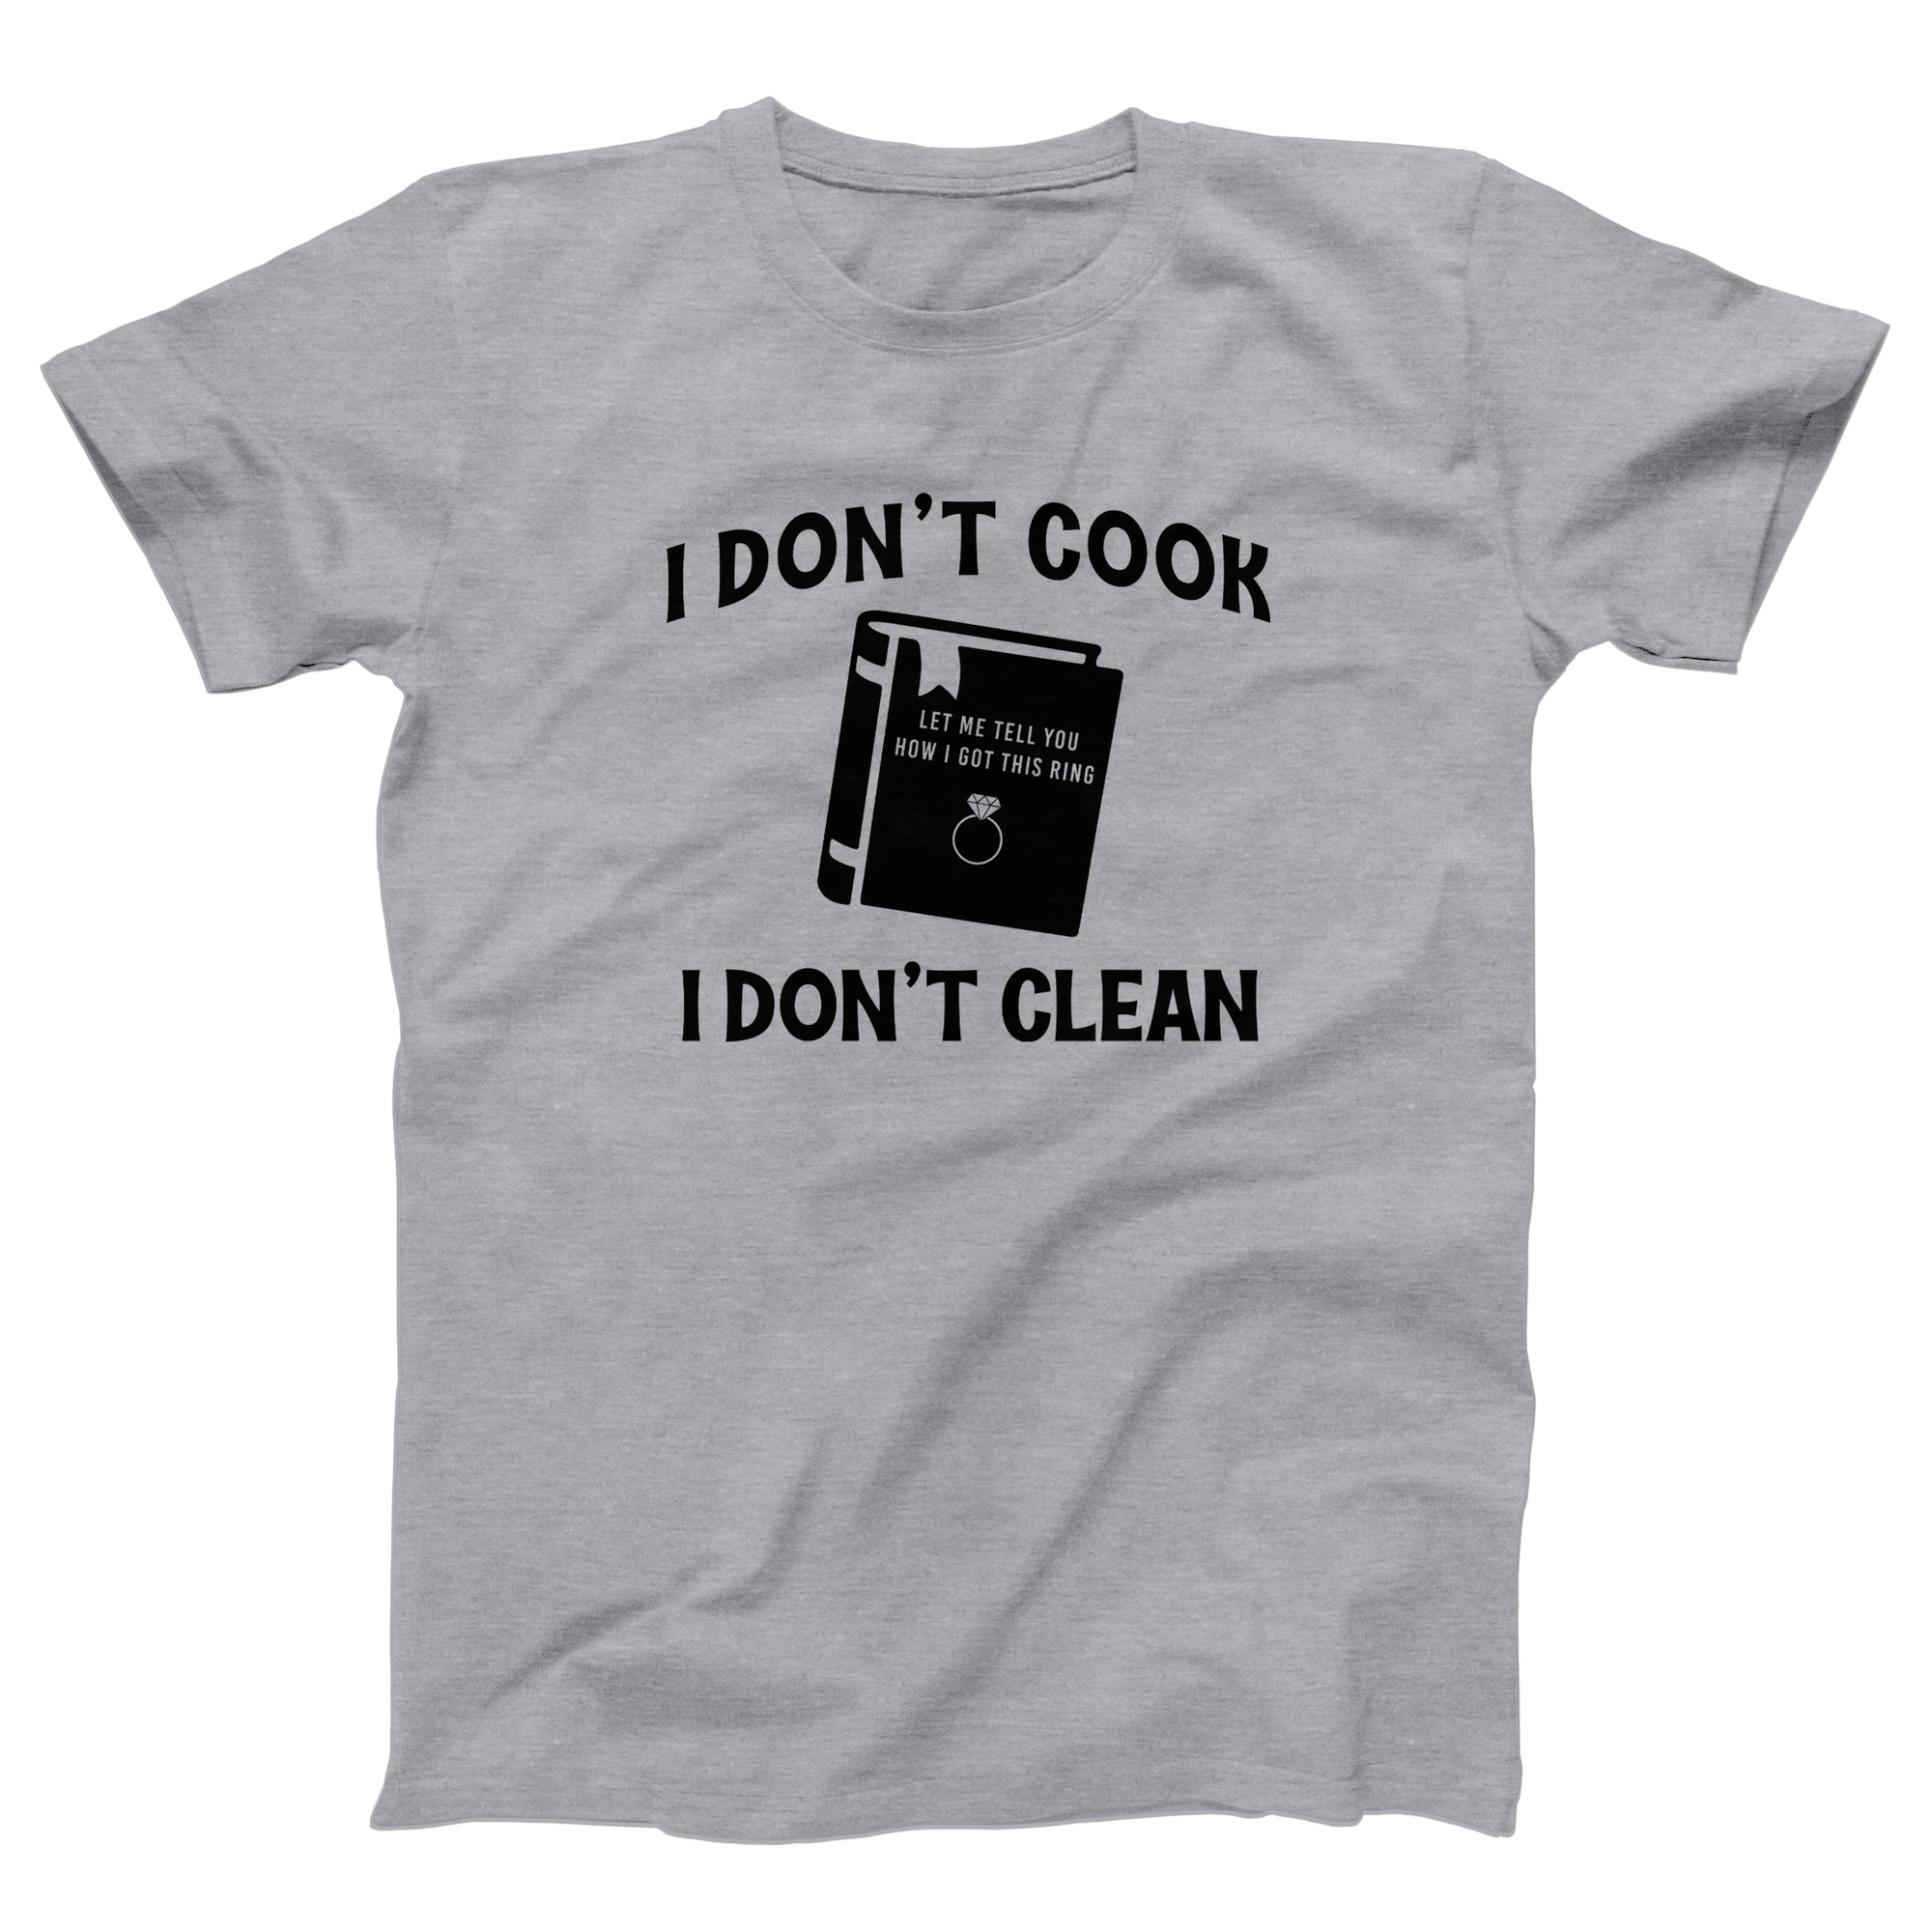 I Don't Cook, I Don't Clean Adult Unisex T-Shirt - Twisted Gorilla